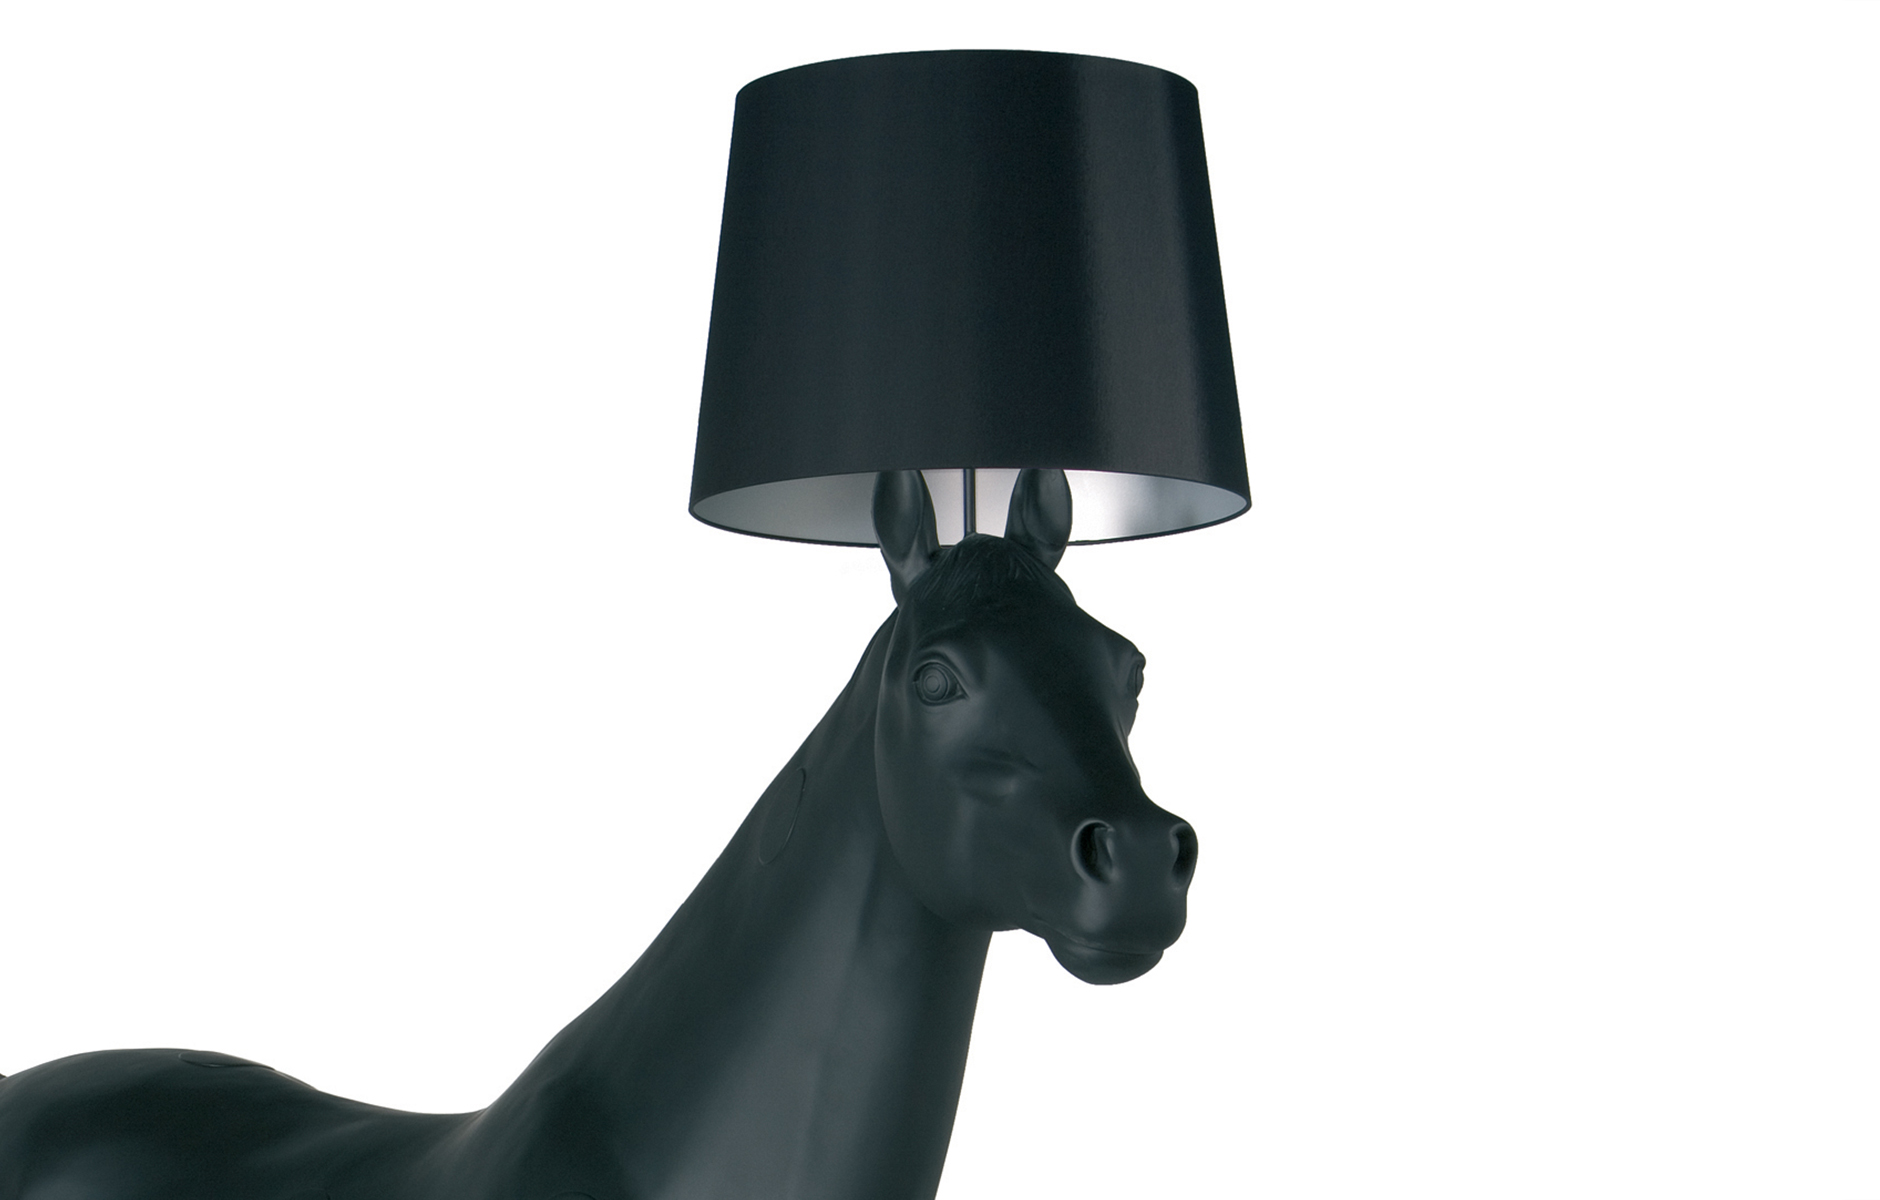 lampshade detail on horse lamp